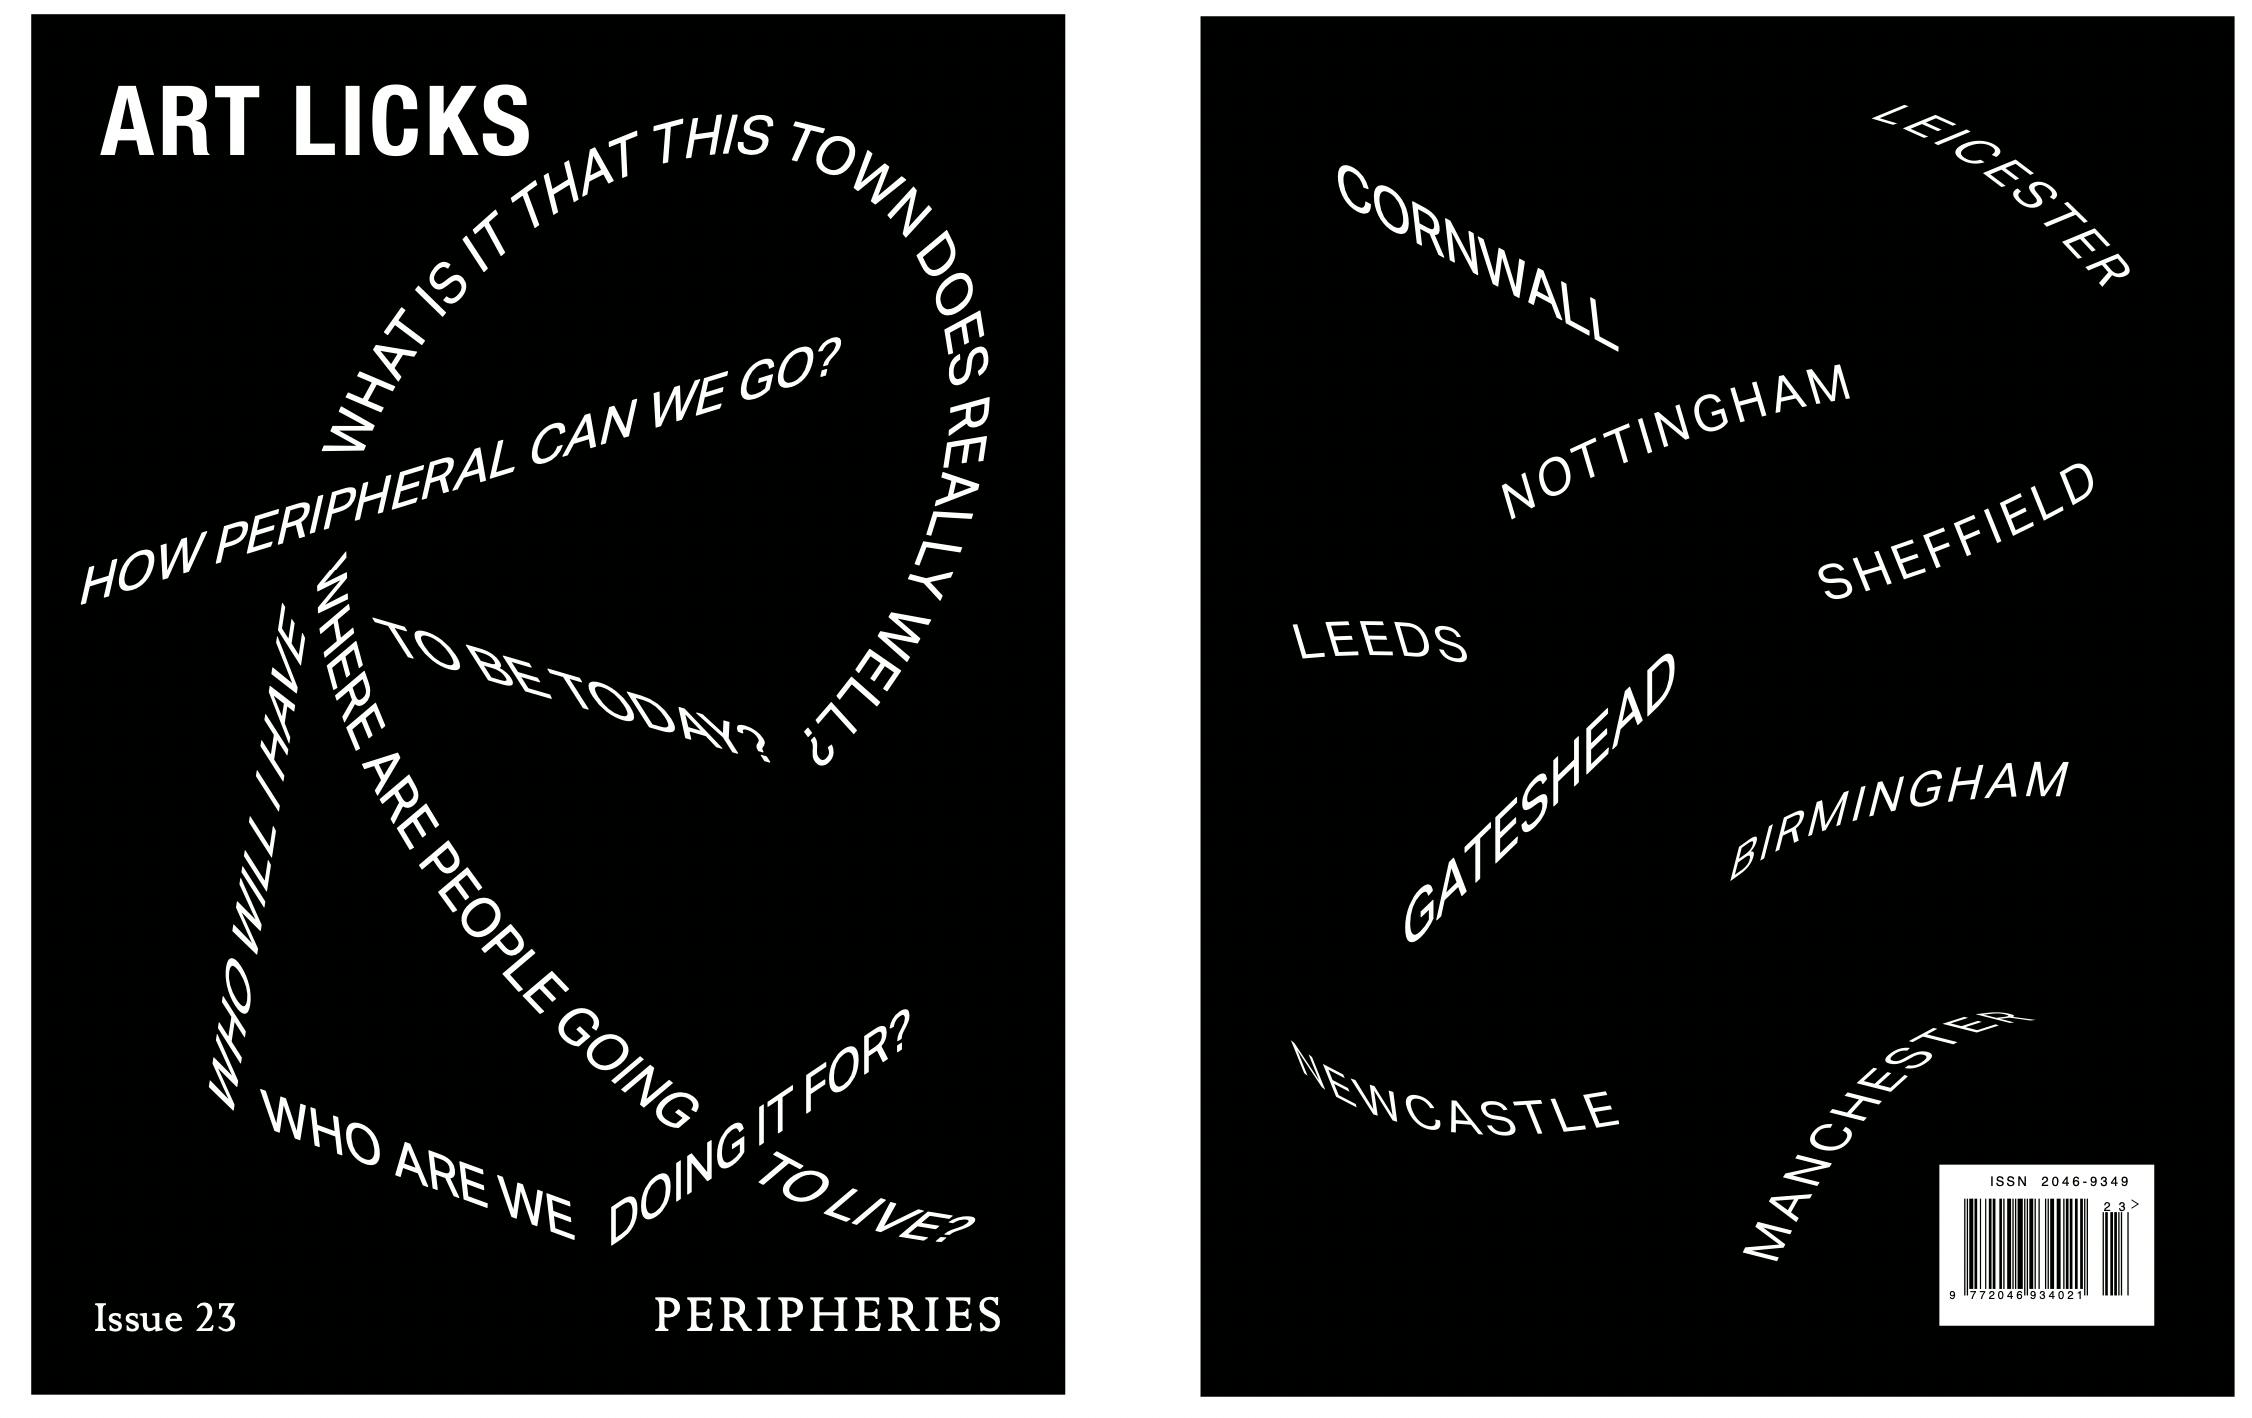 The front and back cover of a magazine. It's in black and white and contains city names across the UK and a series of questions: How peripheral can we go? Who are we doing it for? Who will I have to be today? What is that this town can do really well? 